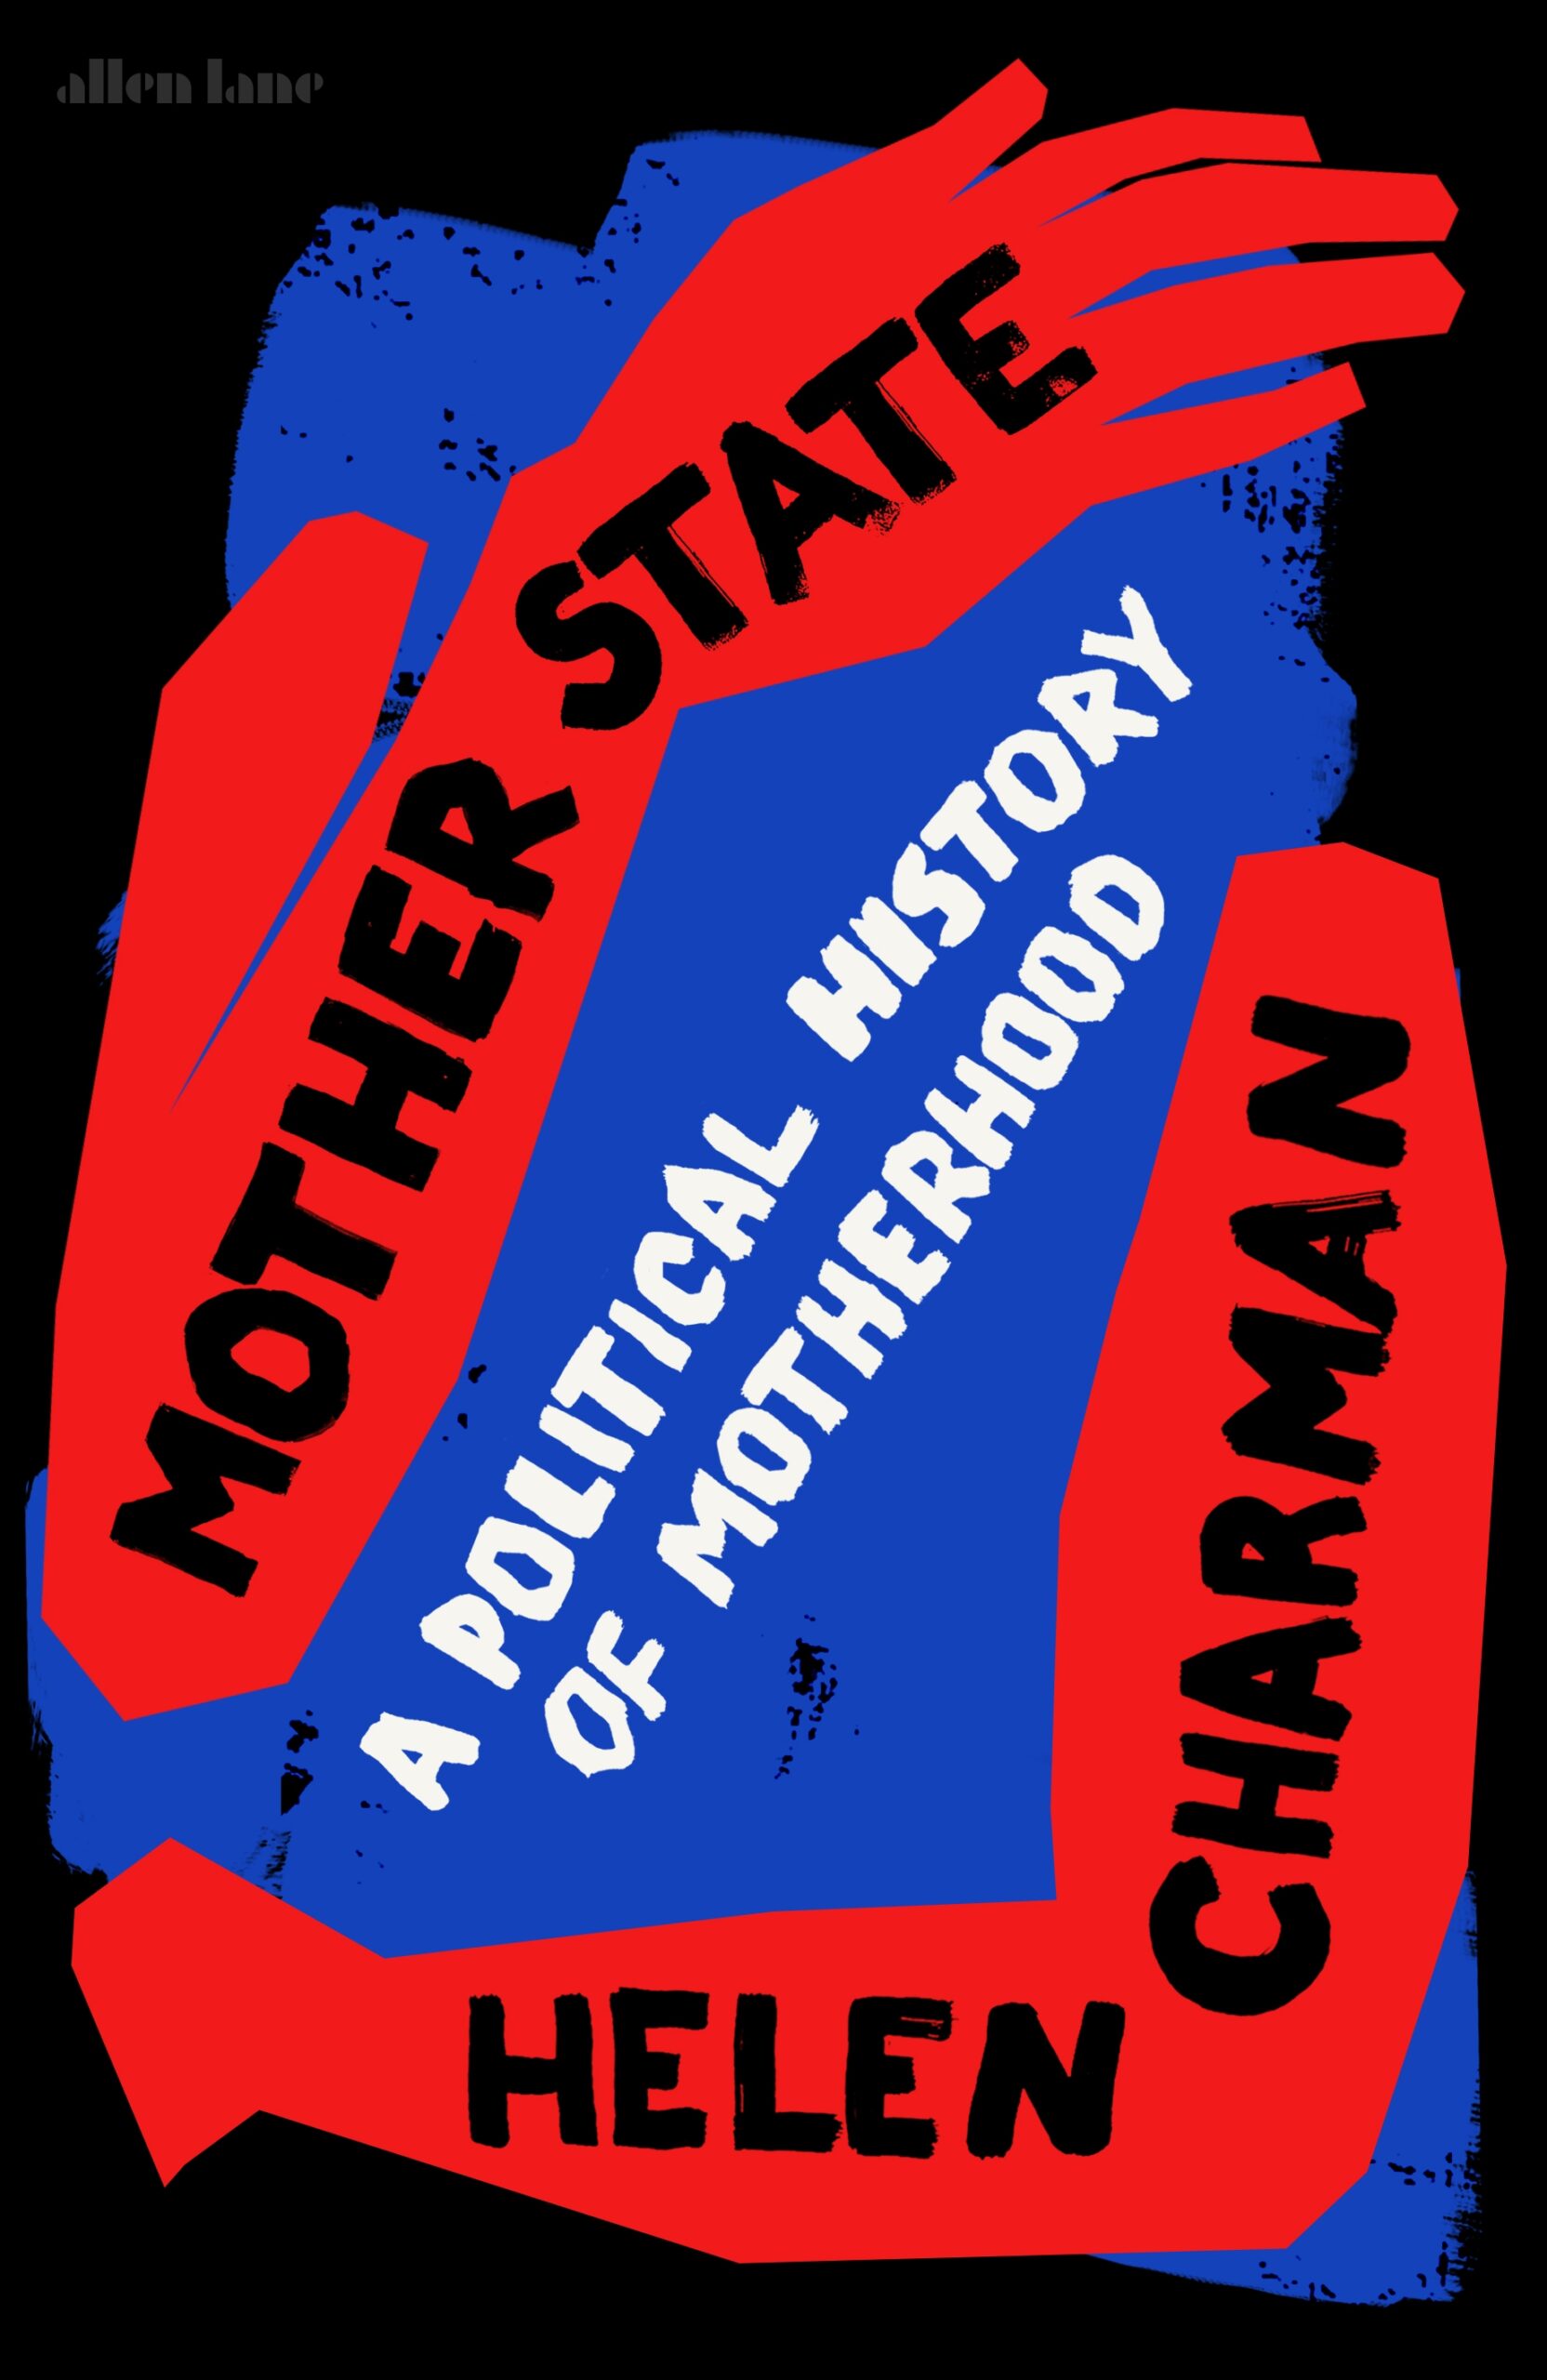 Book cover of Helen Charman's 'Mother State: A Political History of Motherhood' showing an illustration of arms in red over a blue background incorporated with the text.